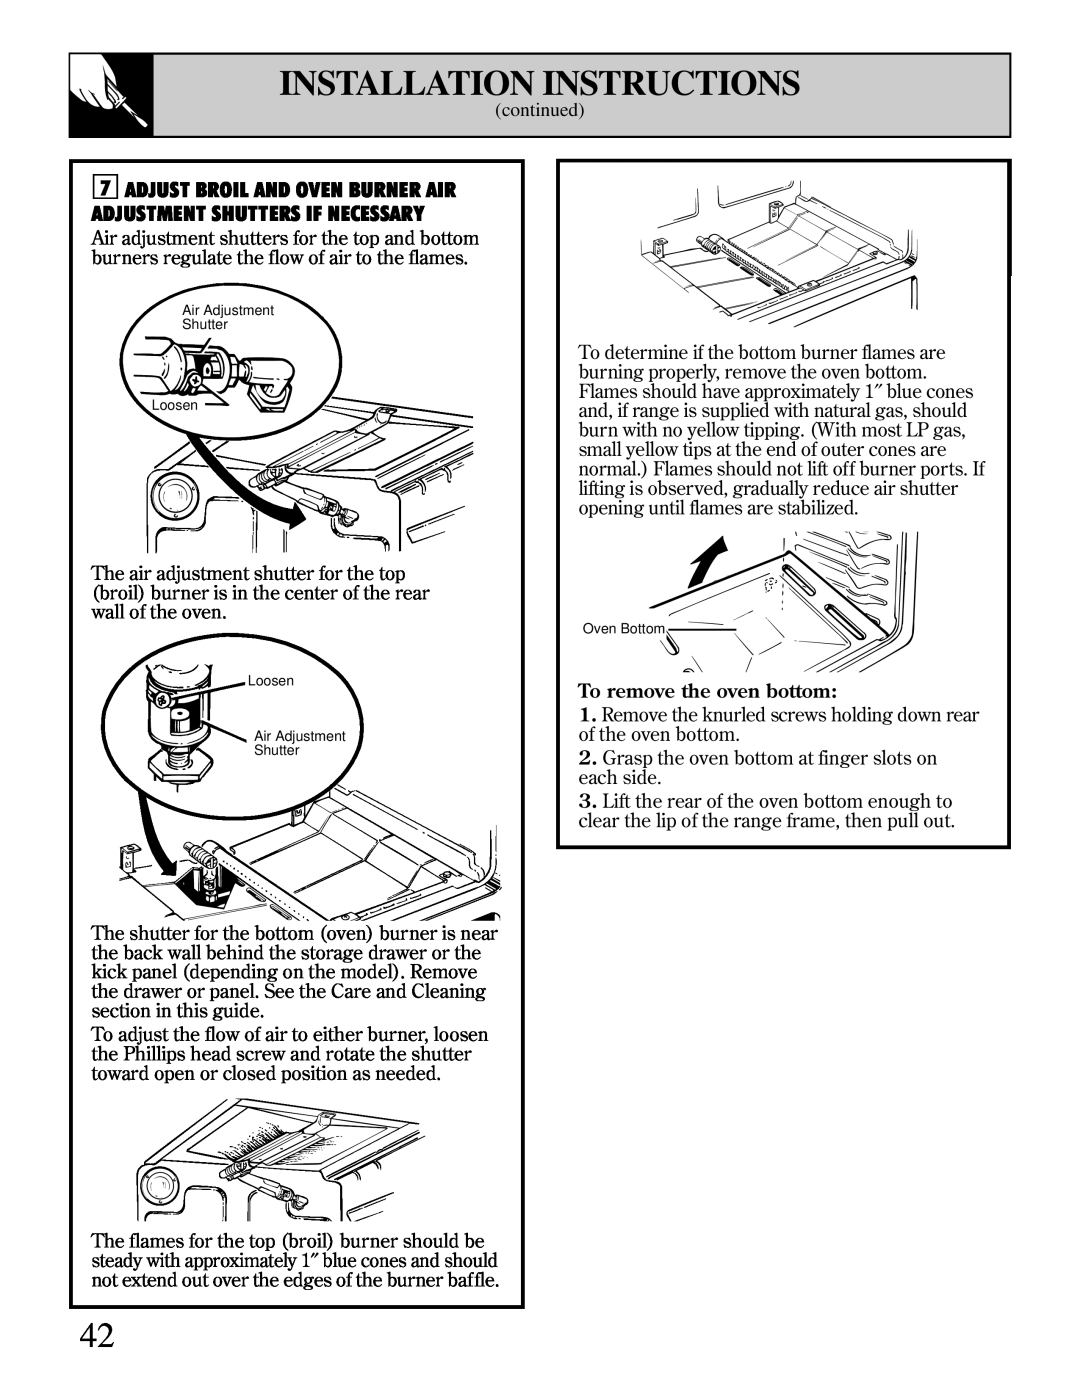 GE JGBP38 installation instructions Installation Instructions, To remove the oven bottom 